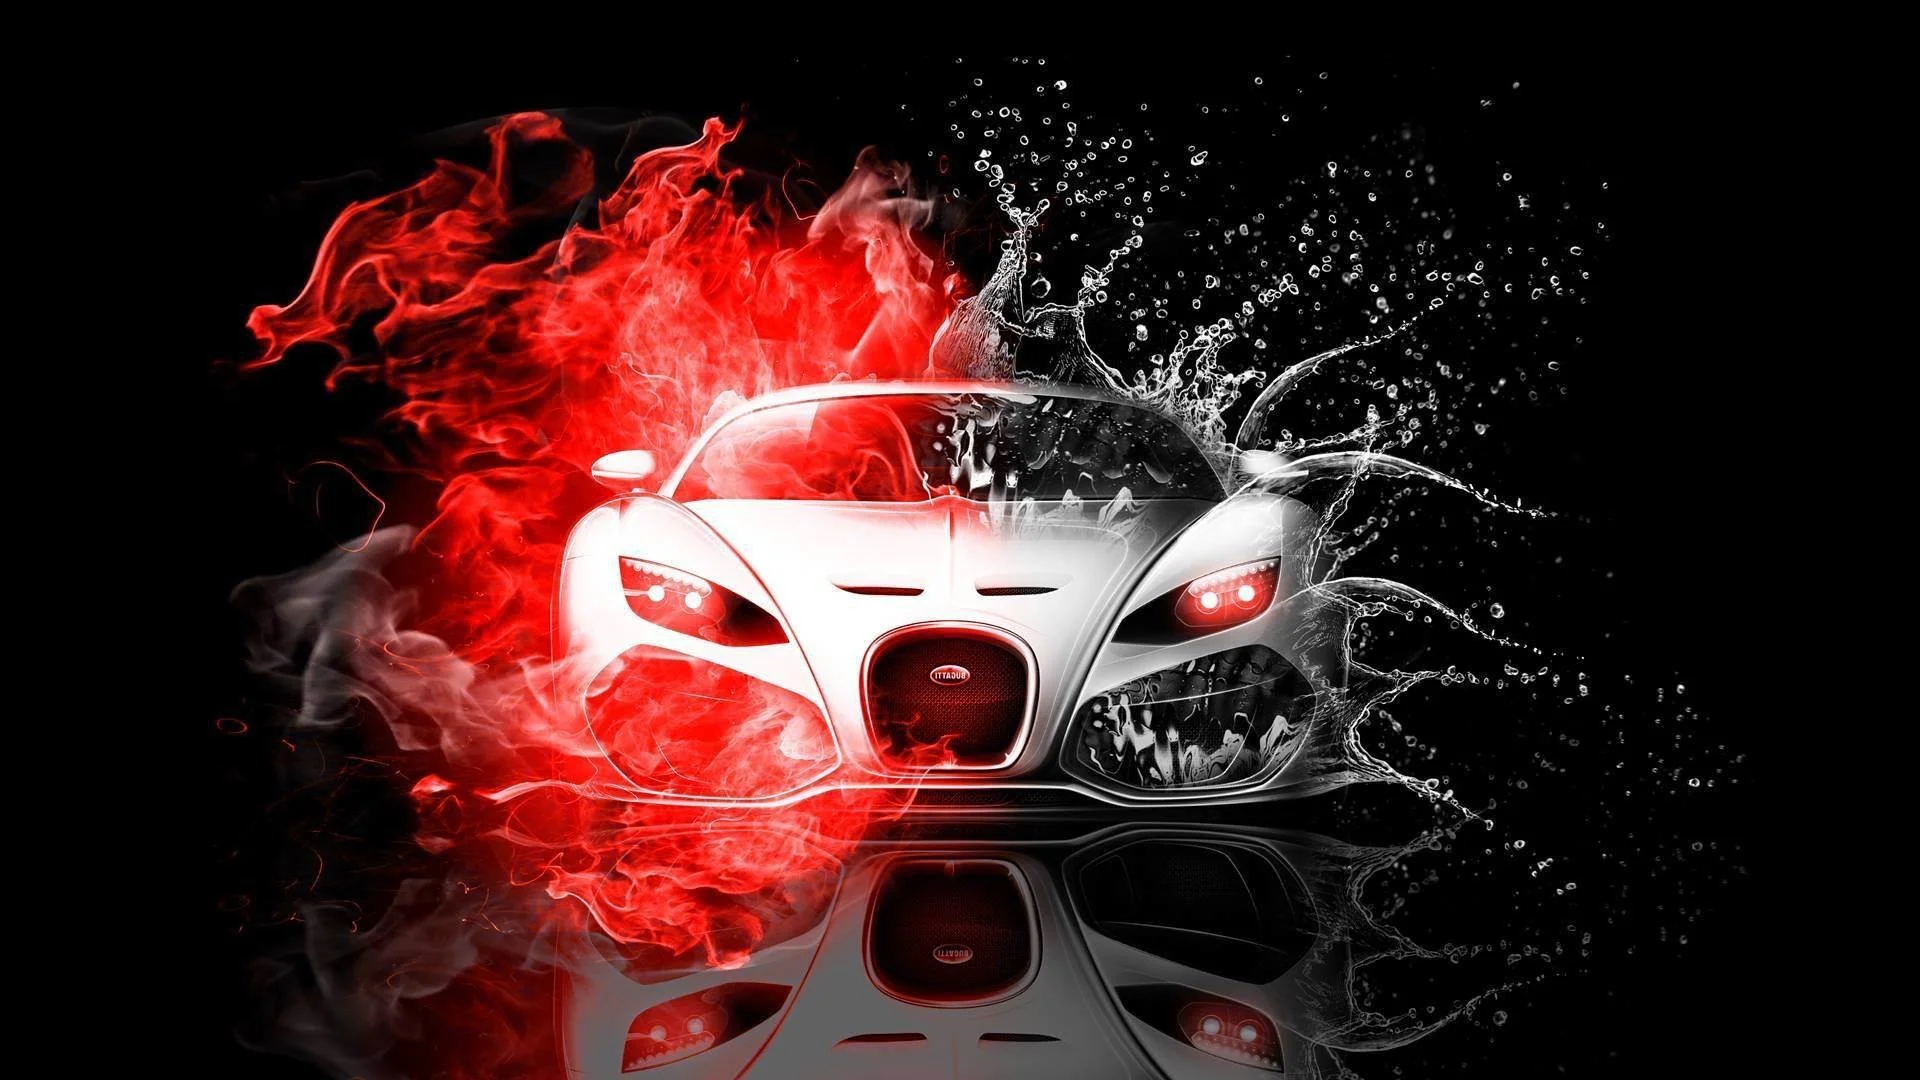 45+ Power Button Car Hd Wallpapers 1920x1080 HD download